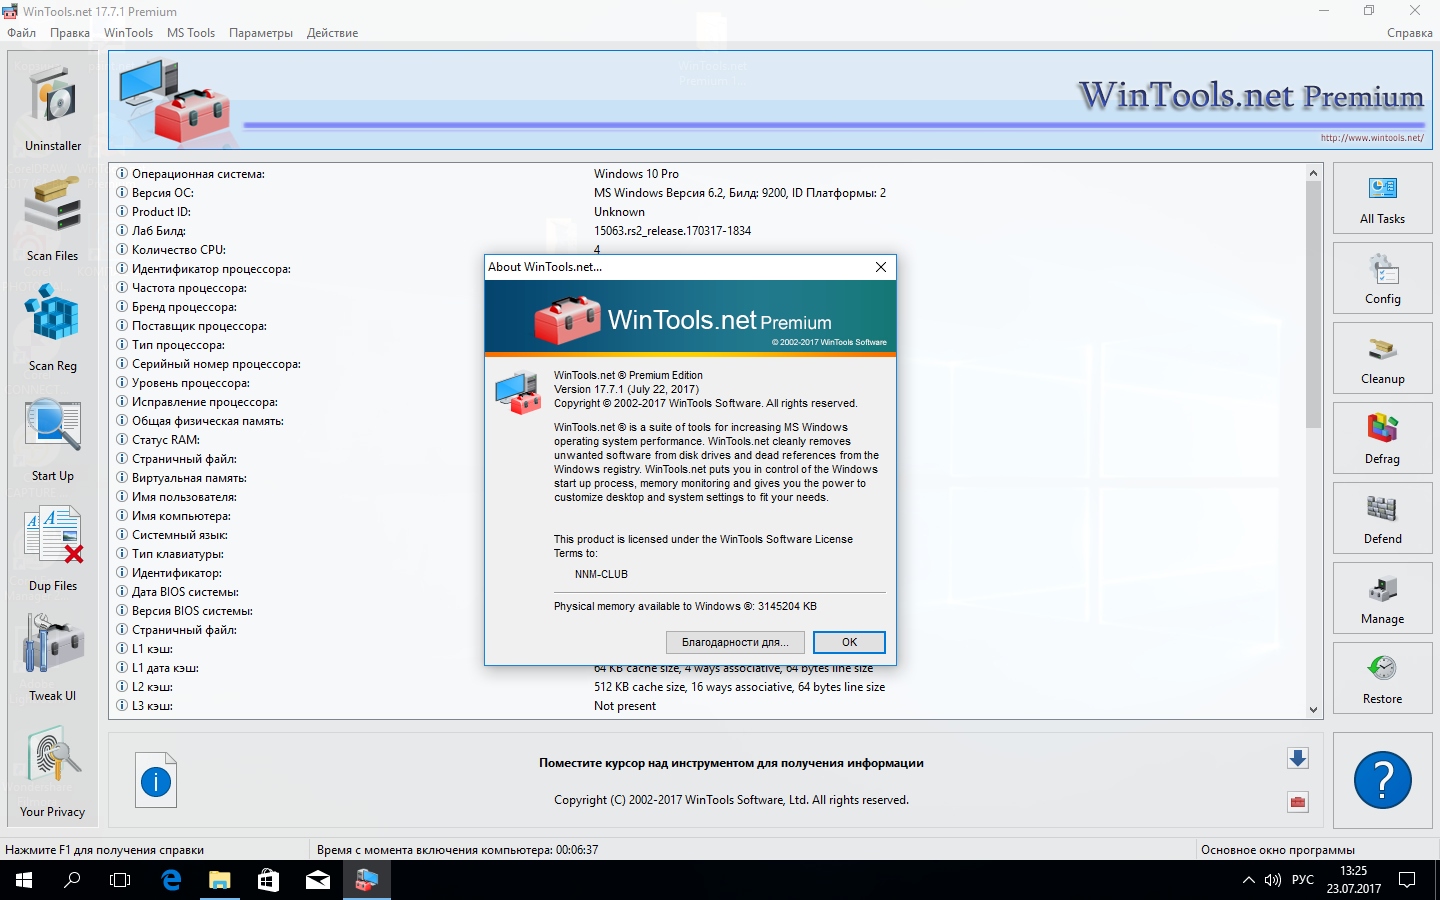 instal the new for ios WinTools net Premium 23.7.1